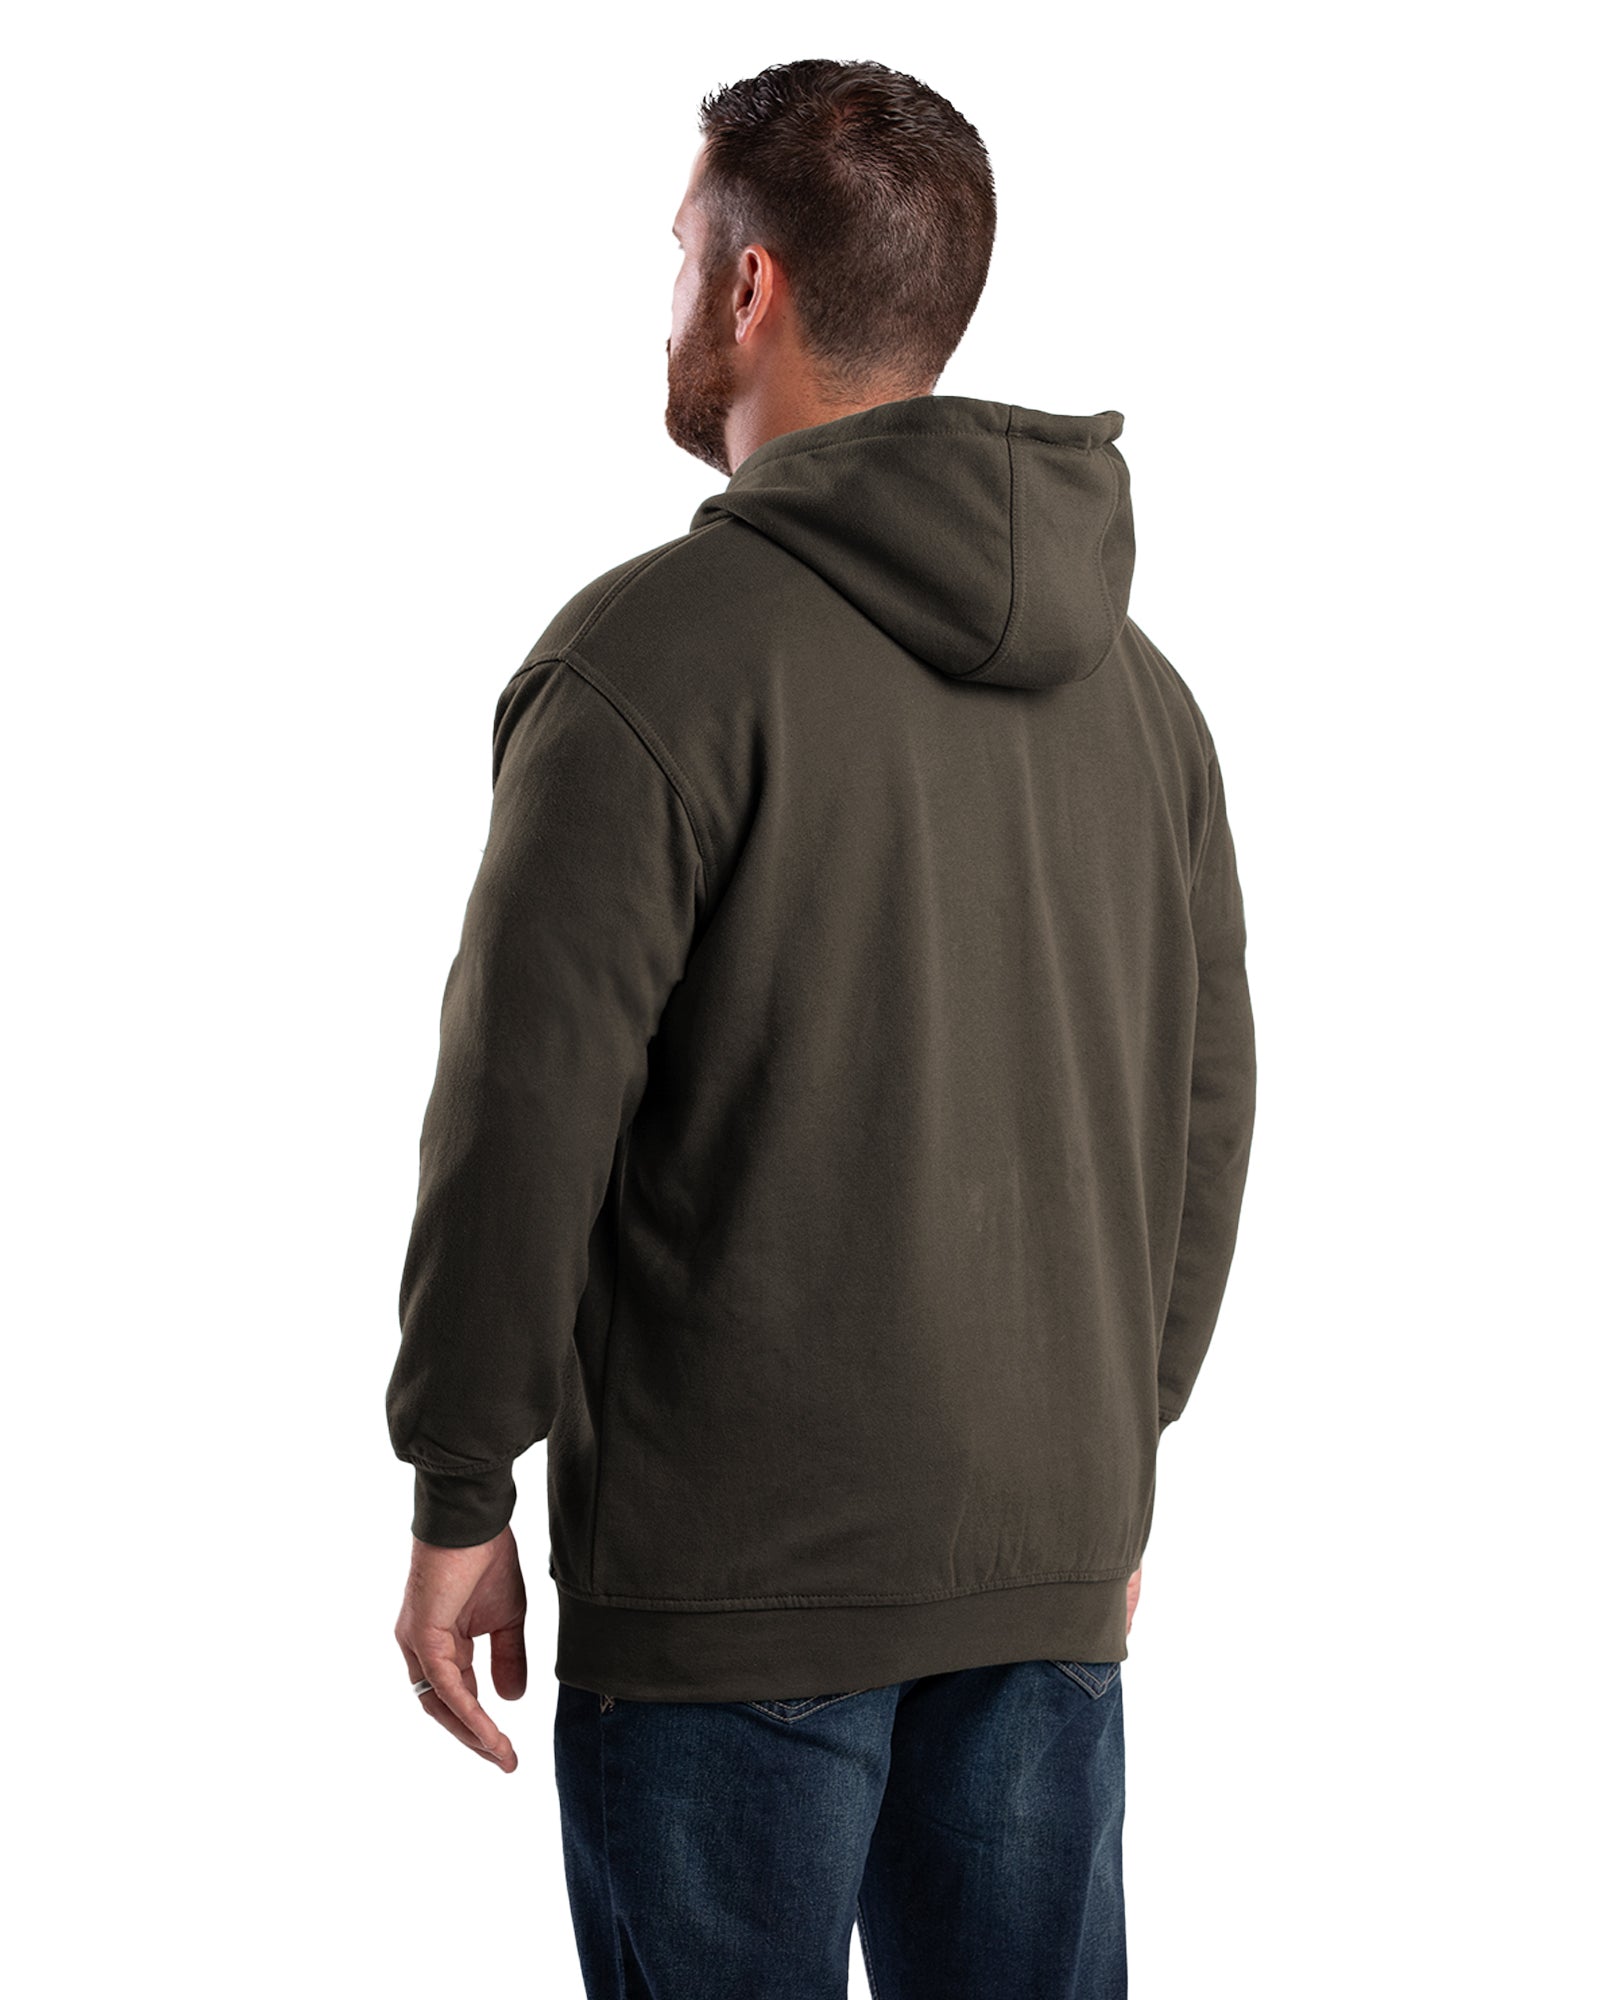 USA Made Thermal-Lined Hooded Sweatshirt - Frank's Sports Shop